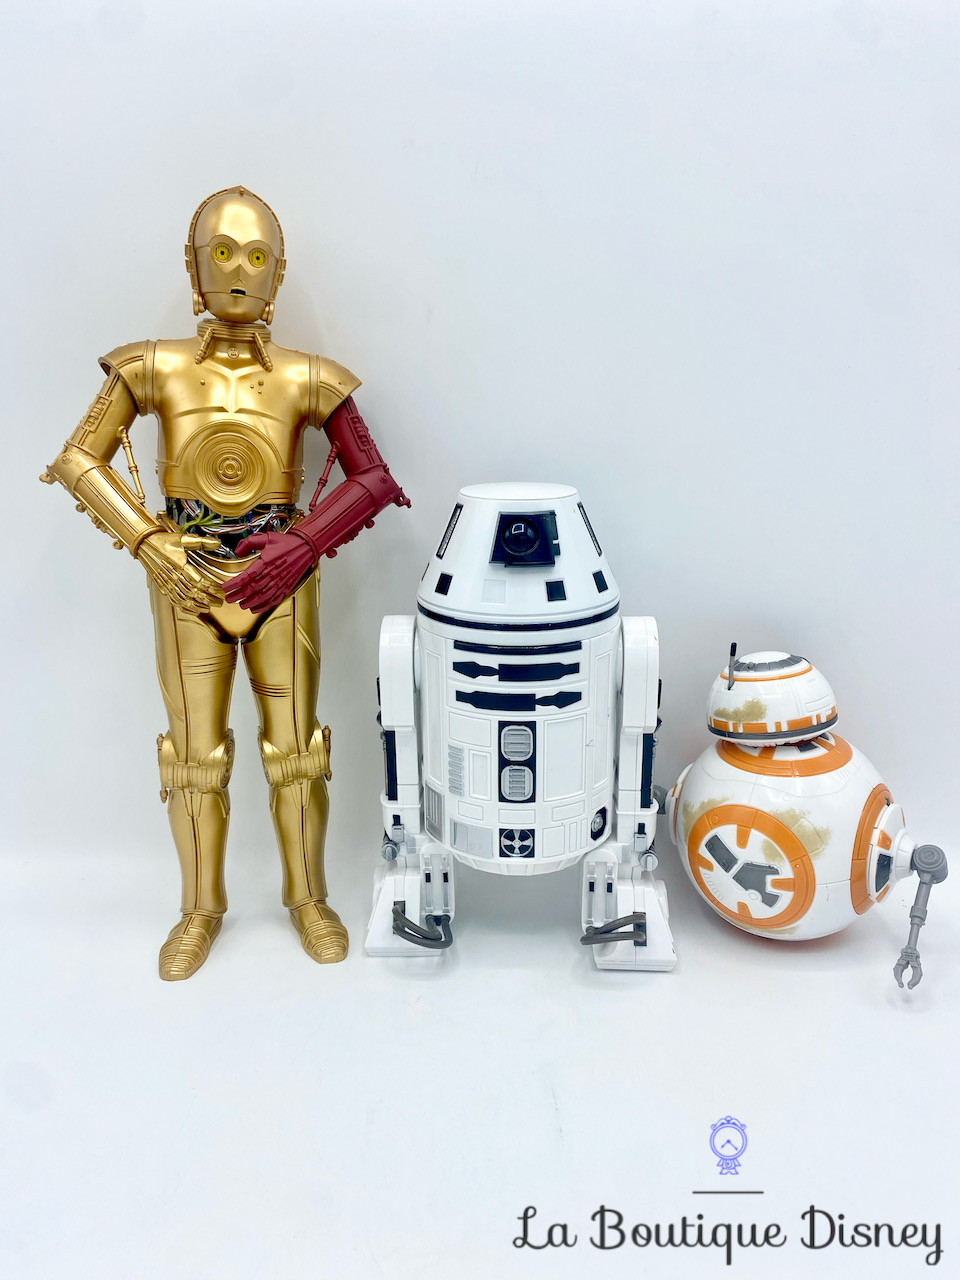 Jouet Figurines Droid Pack Star Wars The Force Awakens Hasbro Disney 2015 C3PO BB8 RO4LO Special Collectors Edition